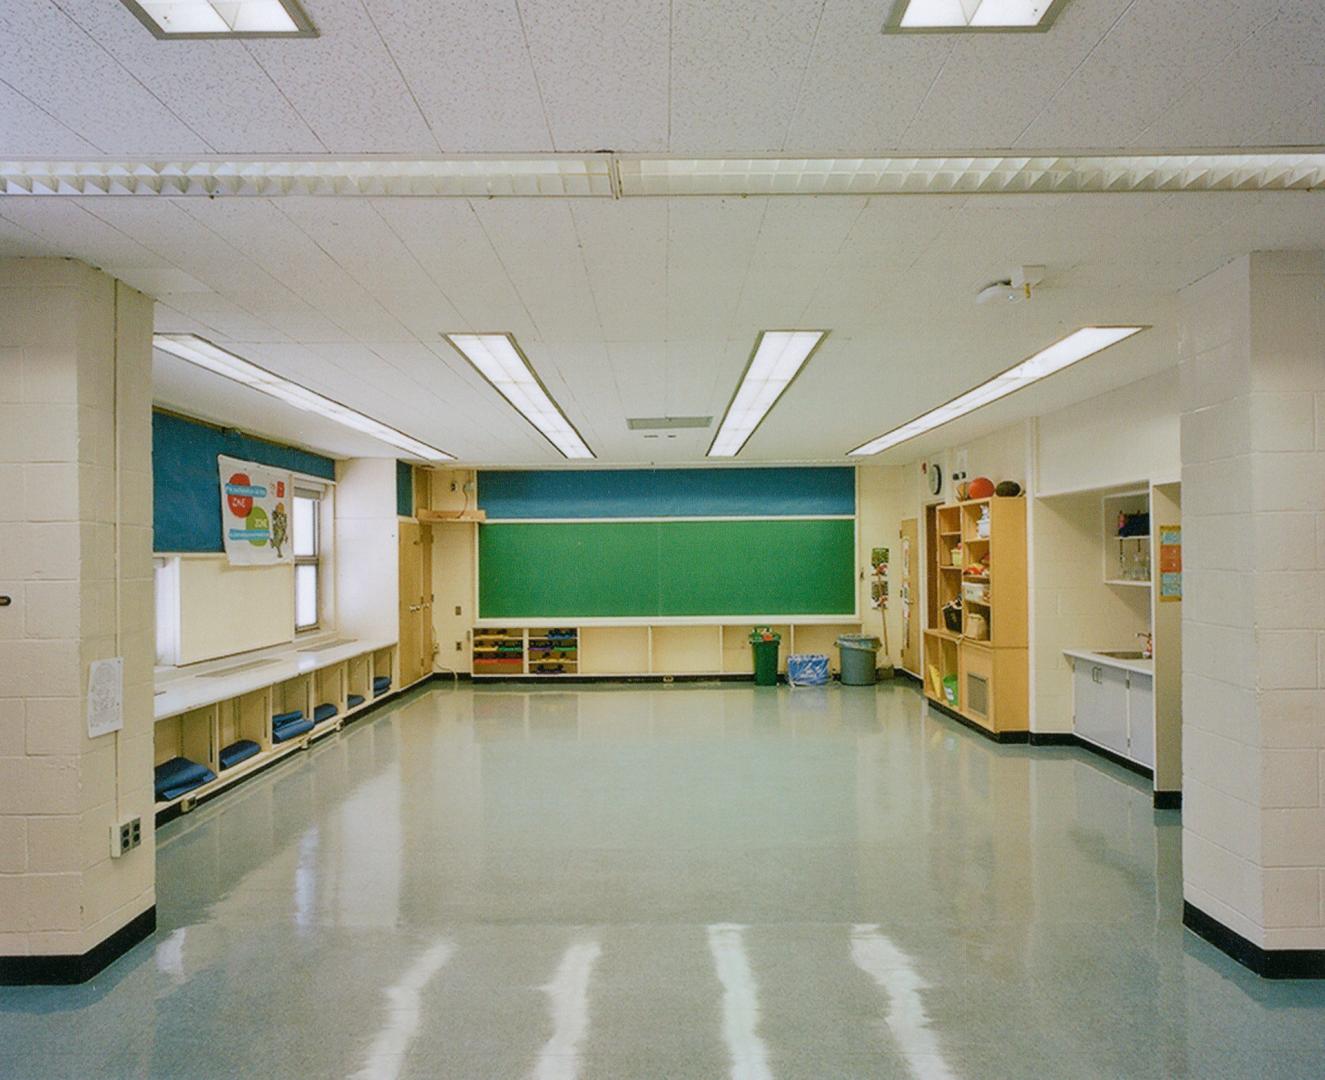 A photo of an open area in a public school, with a chalkboard, shelving units, a sink and windo ...